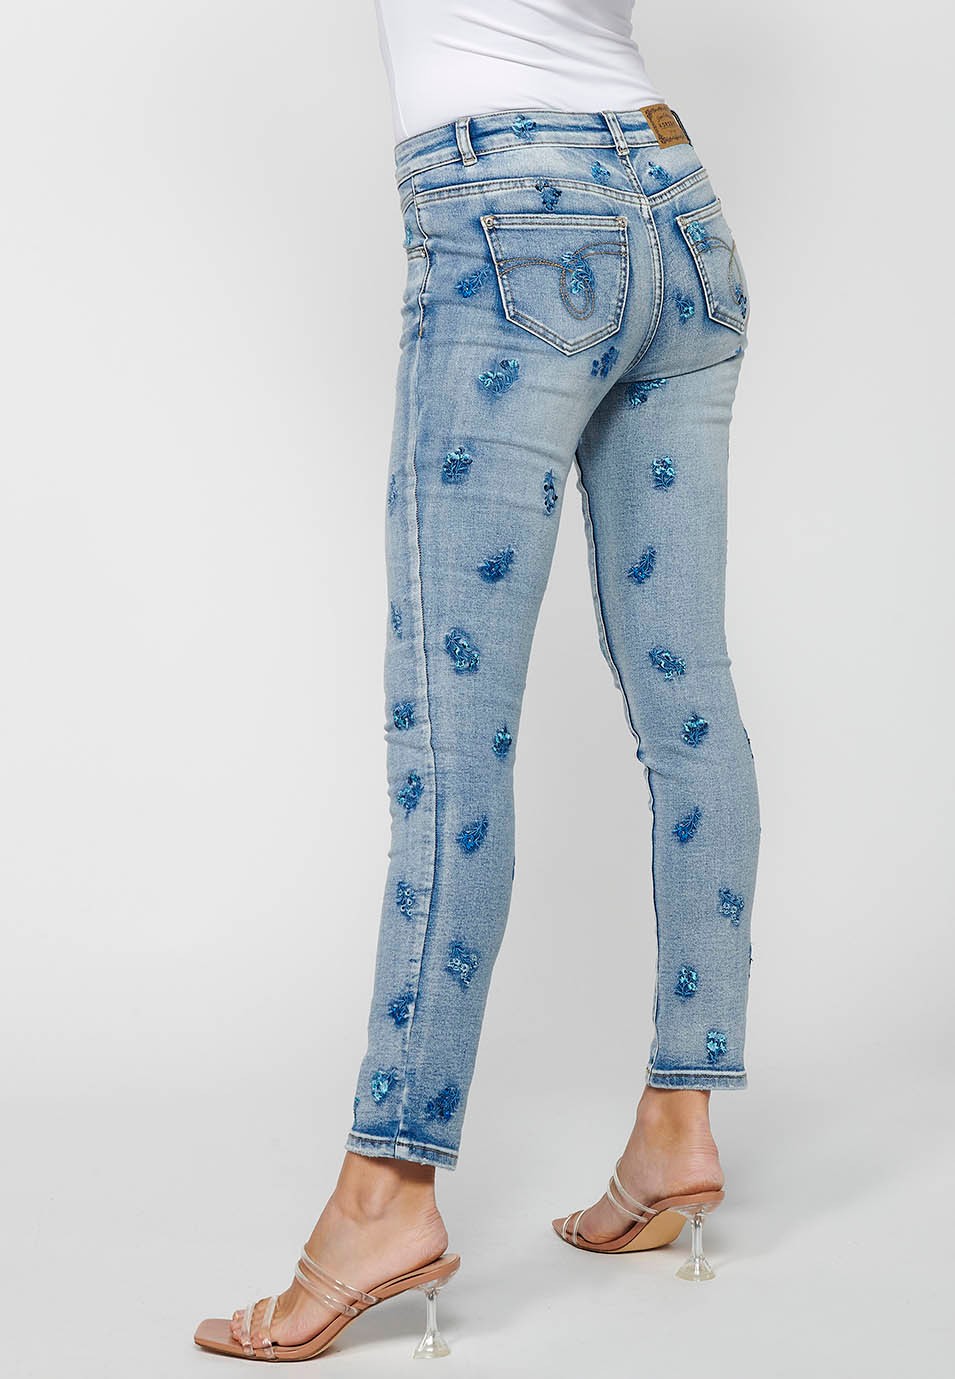 Slim long pants with front zipper and button closure with floral embroidery in Light Blue for Women 8